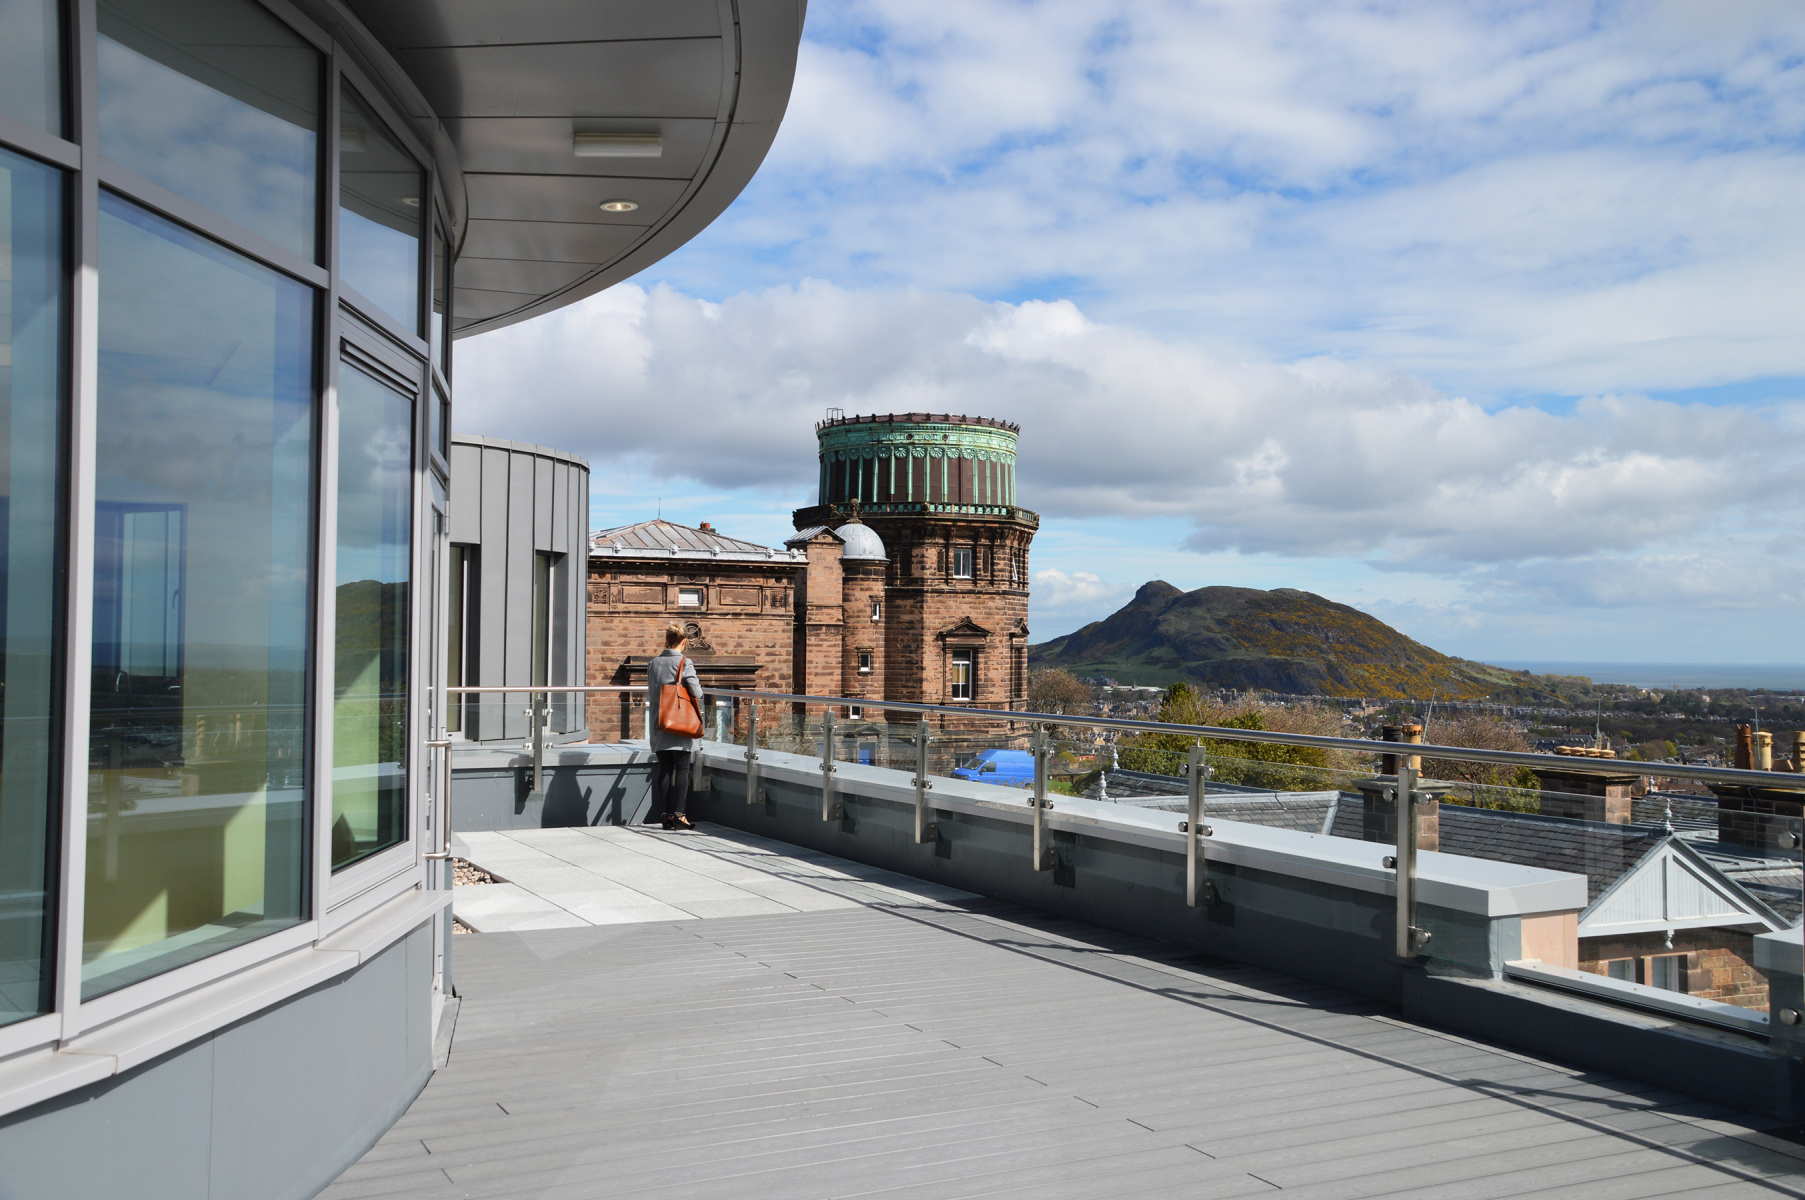 The Higgs Centre for Innovation based at the Royal Observatory Edinburgh is home to ESA BIC UK at Edinburgh.